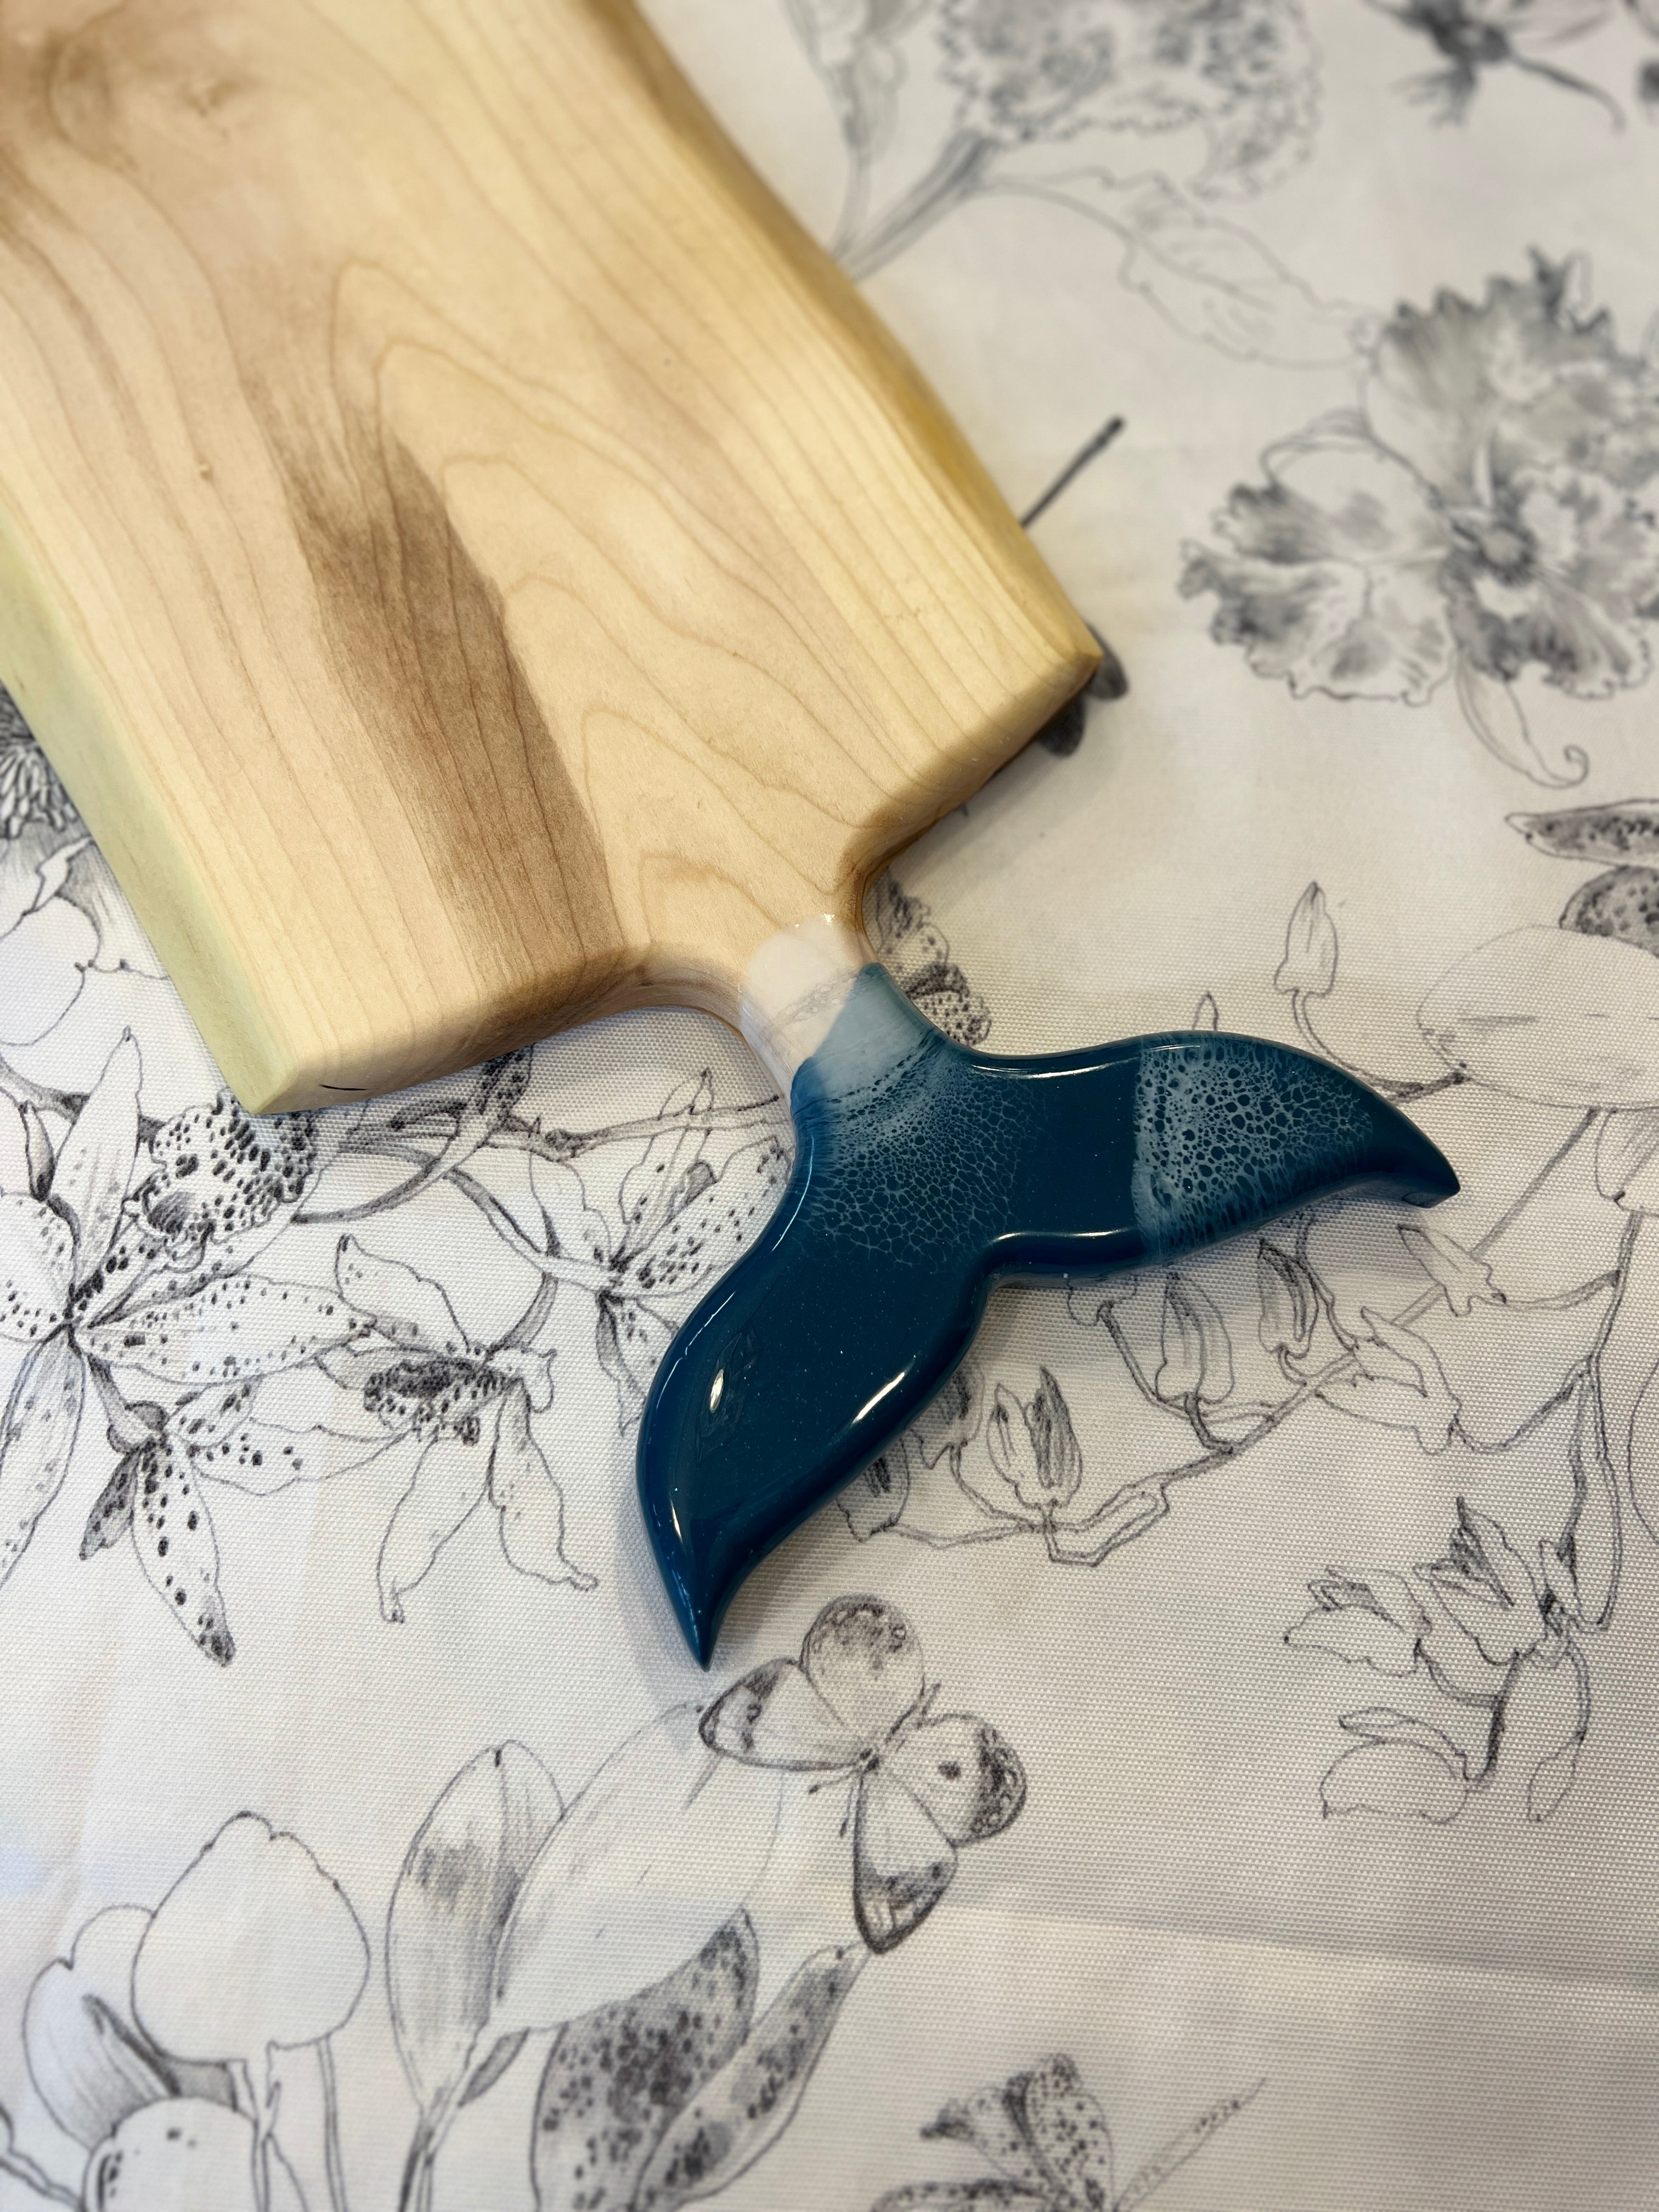 Whale Tail Serving Board